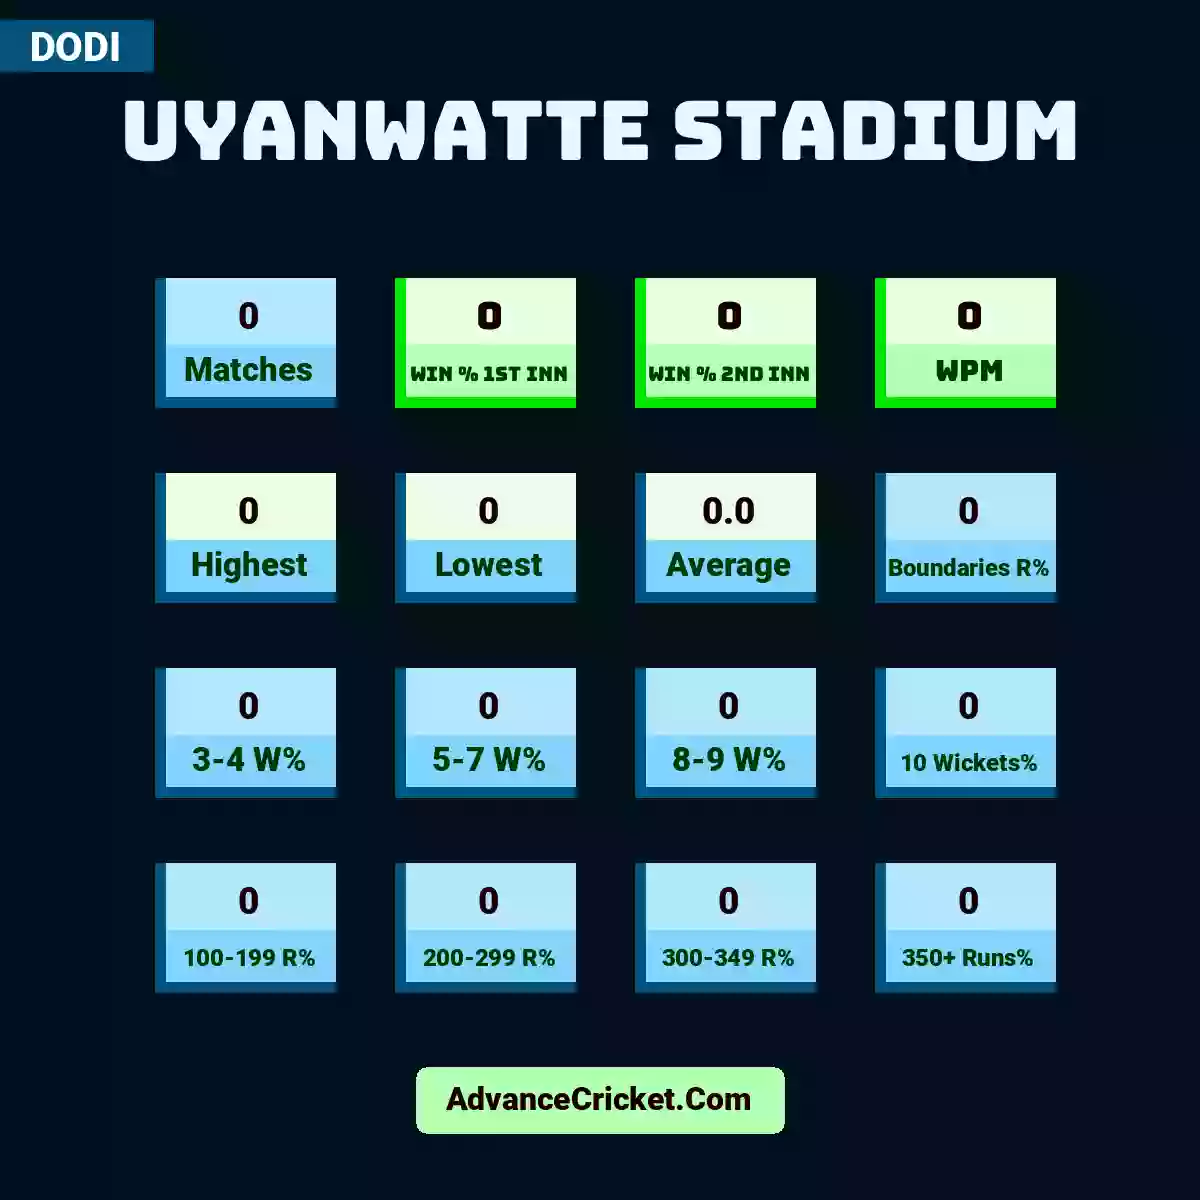 Image showing Uyanwatte Stadium with Matches: 0, Win % 1st Inn: 0, Win % 2nd Inn: 0, WPM: 0, Highest: 0, Lowest: 0, Average: 0.0, Boundaries R%: 0, 3-4 W%: 0, 5-7 W%: 0, 8-9 W%: 0, 10 Wickets%: 0, 100-199 R%: 0, 200-299 R%: 0, 300-349 R%: 0, 350+ Runs%: 0.